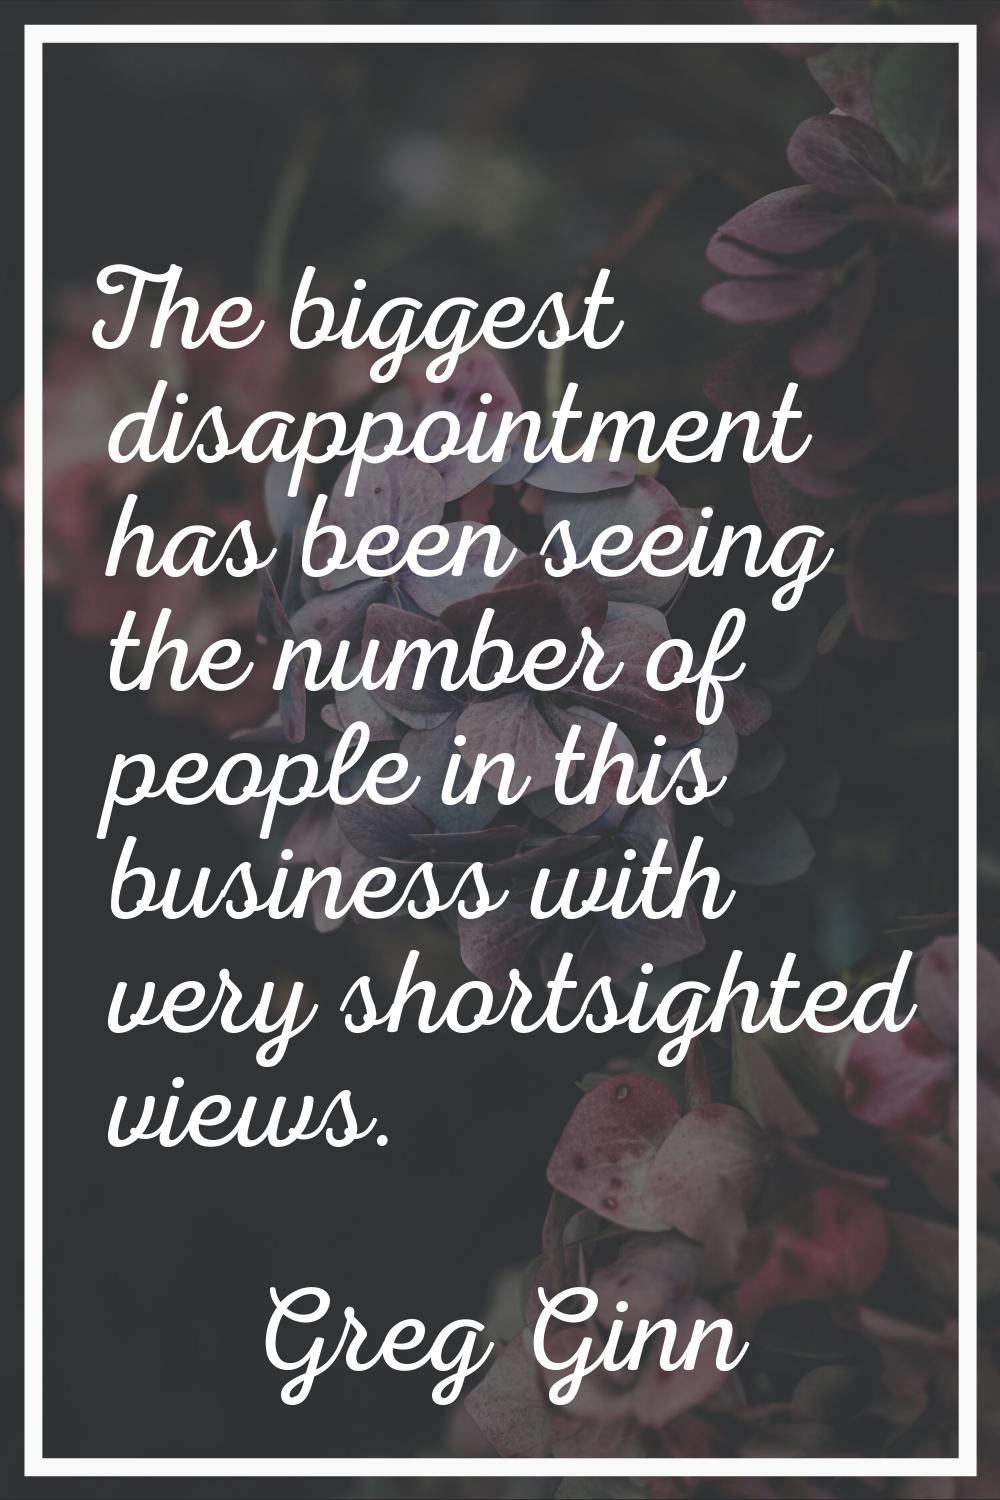 The biggest disappointment has been seeing the number of people in this business with very shortsig